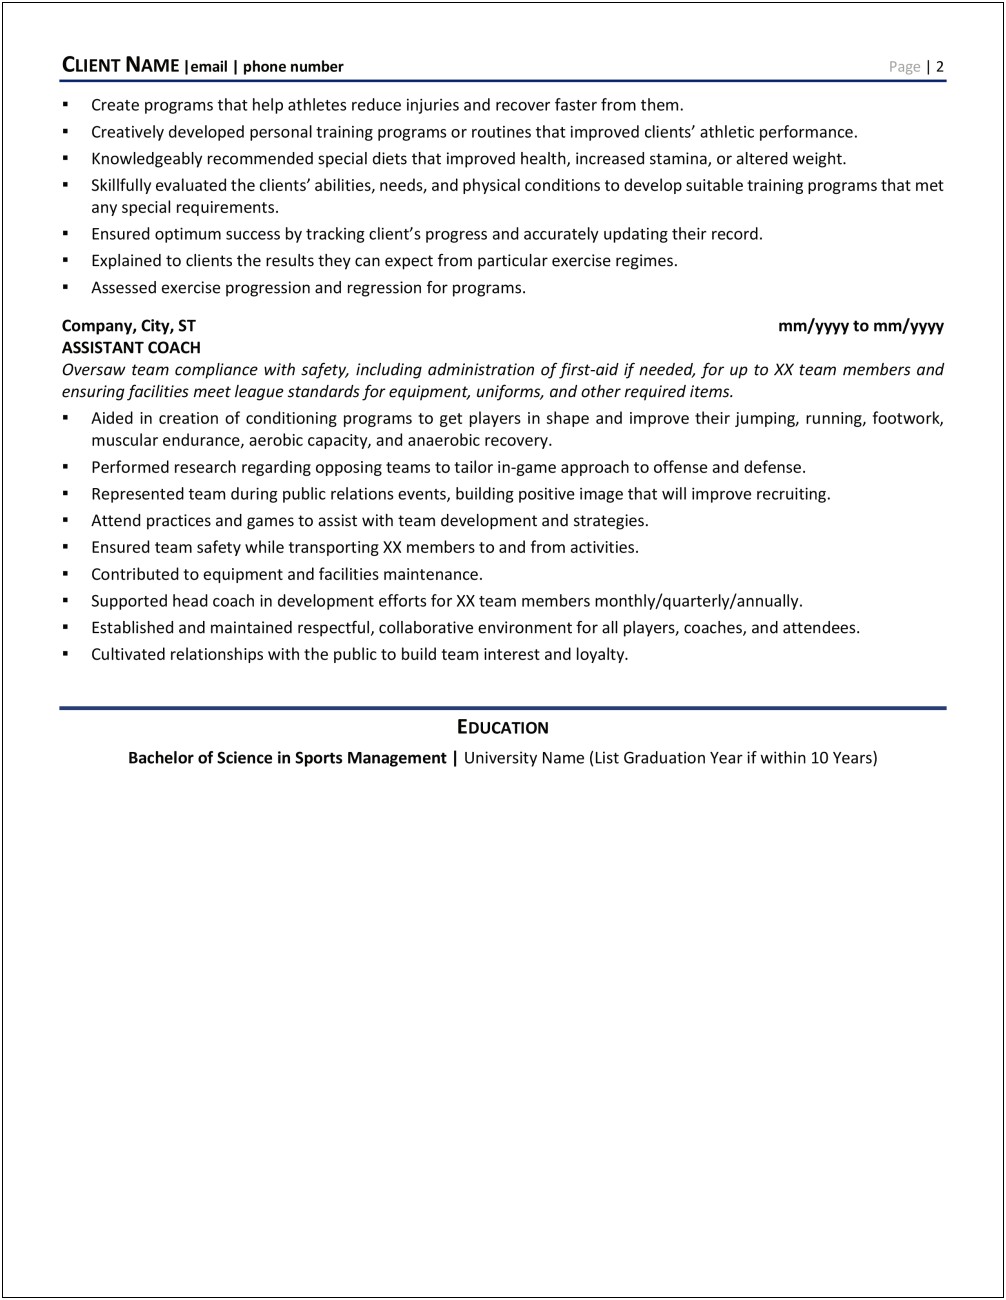 Resume Objective For Gym Trainer